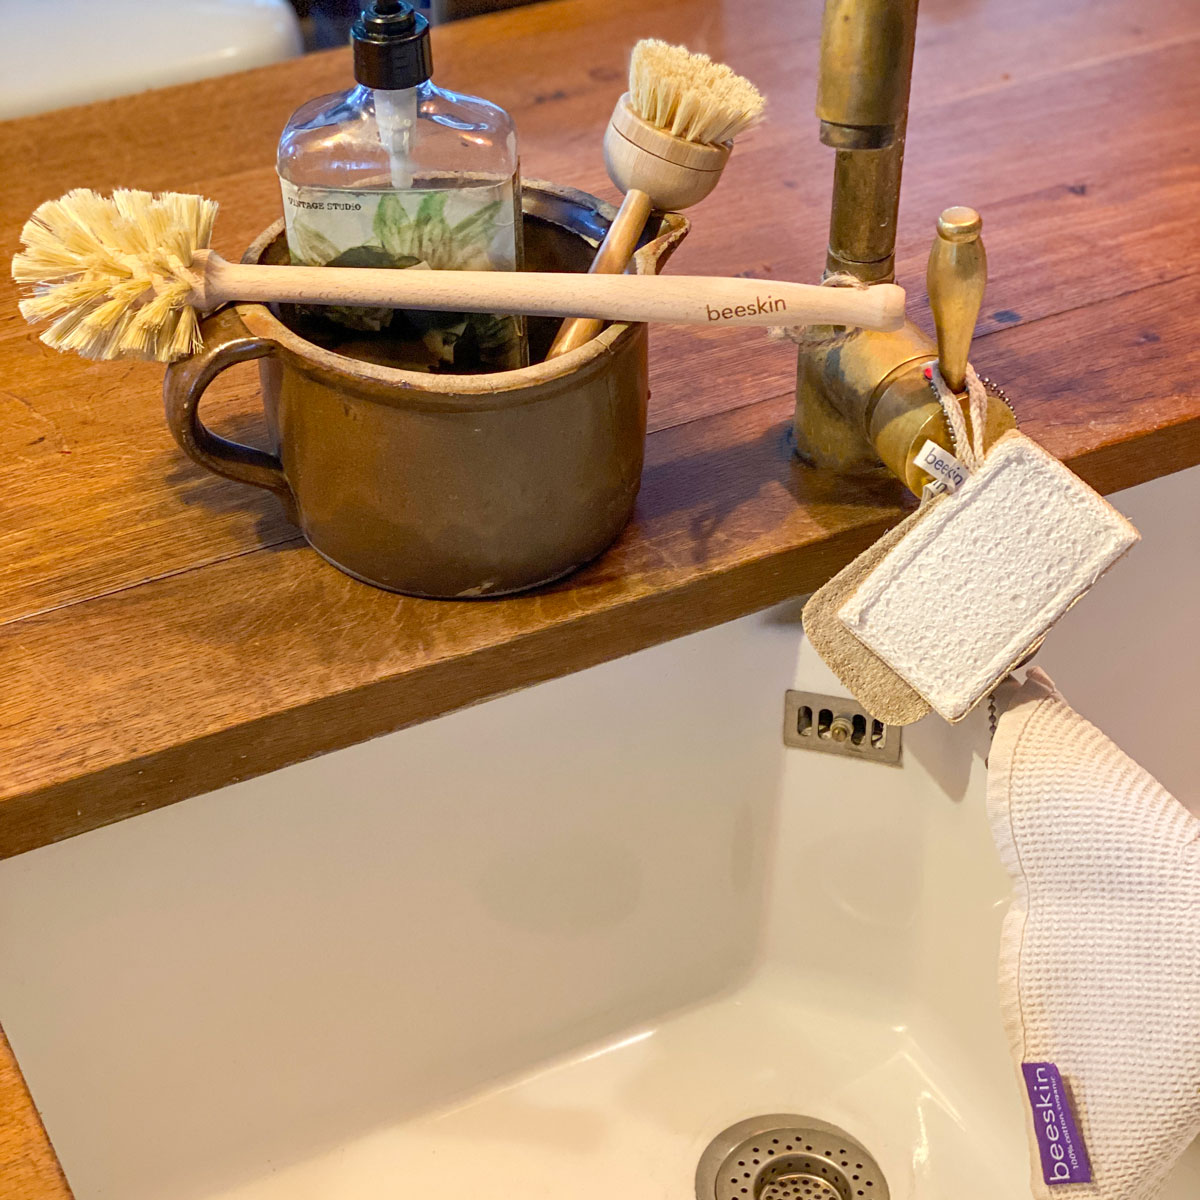 brushes for cleaning dishes and loofah to clean, also beeskin dishcloth on a white sink